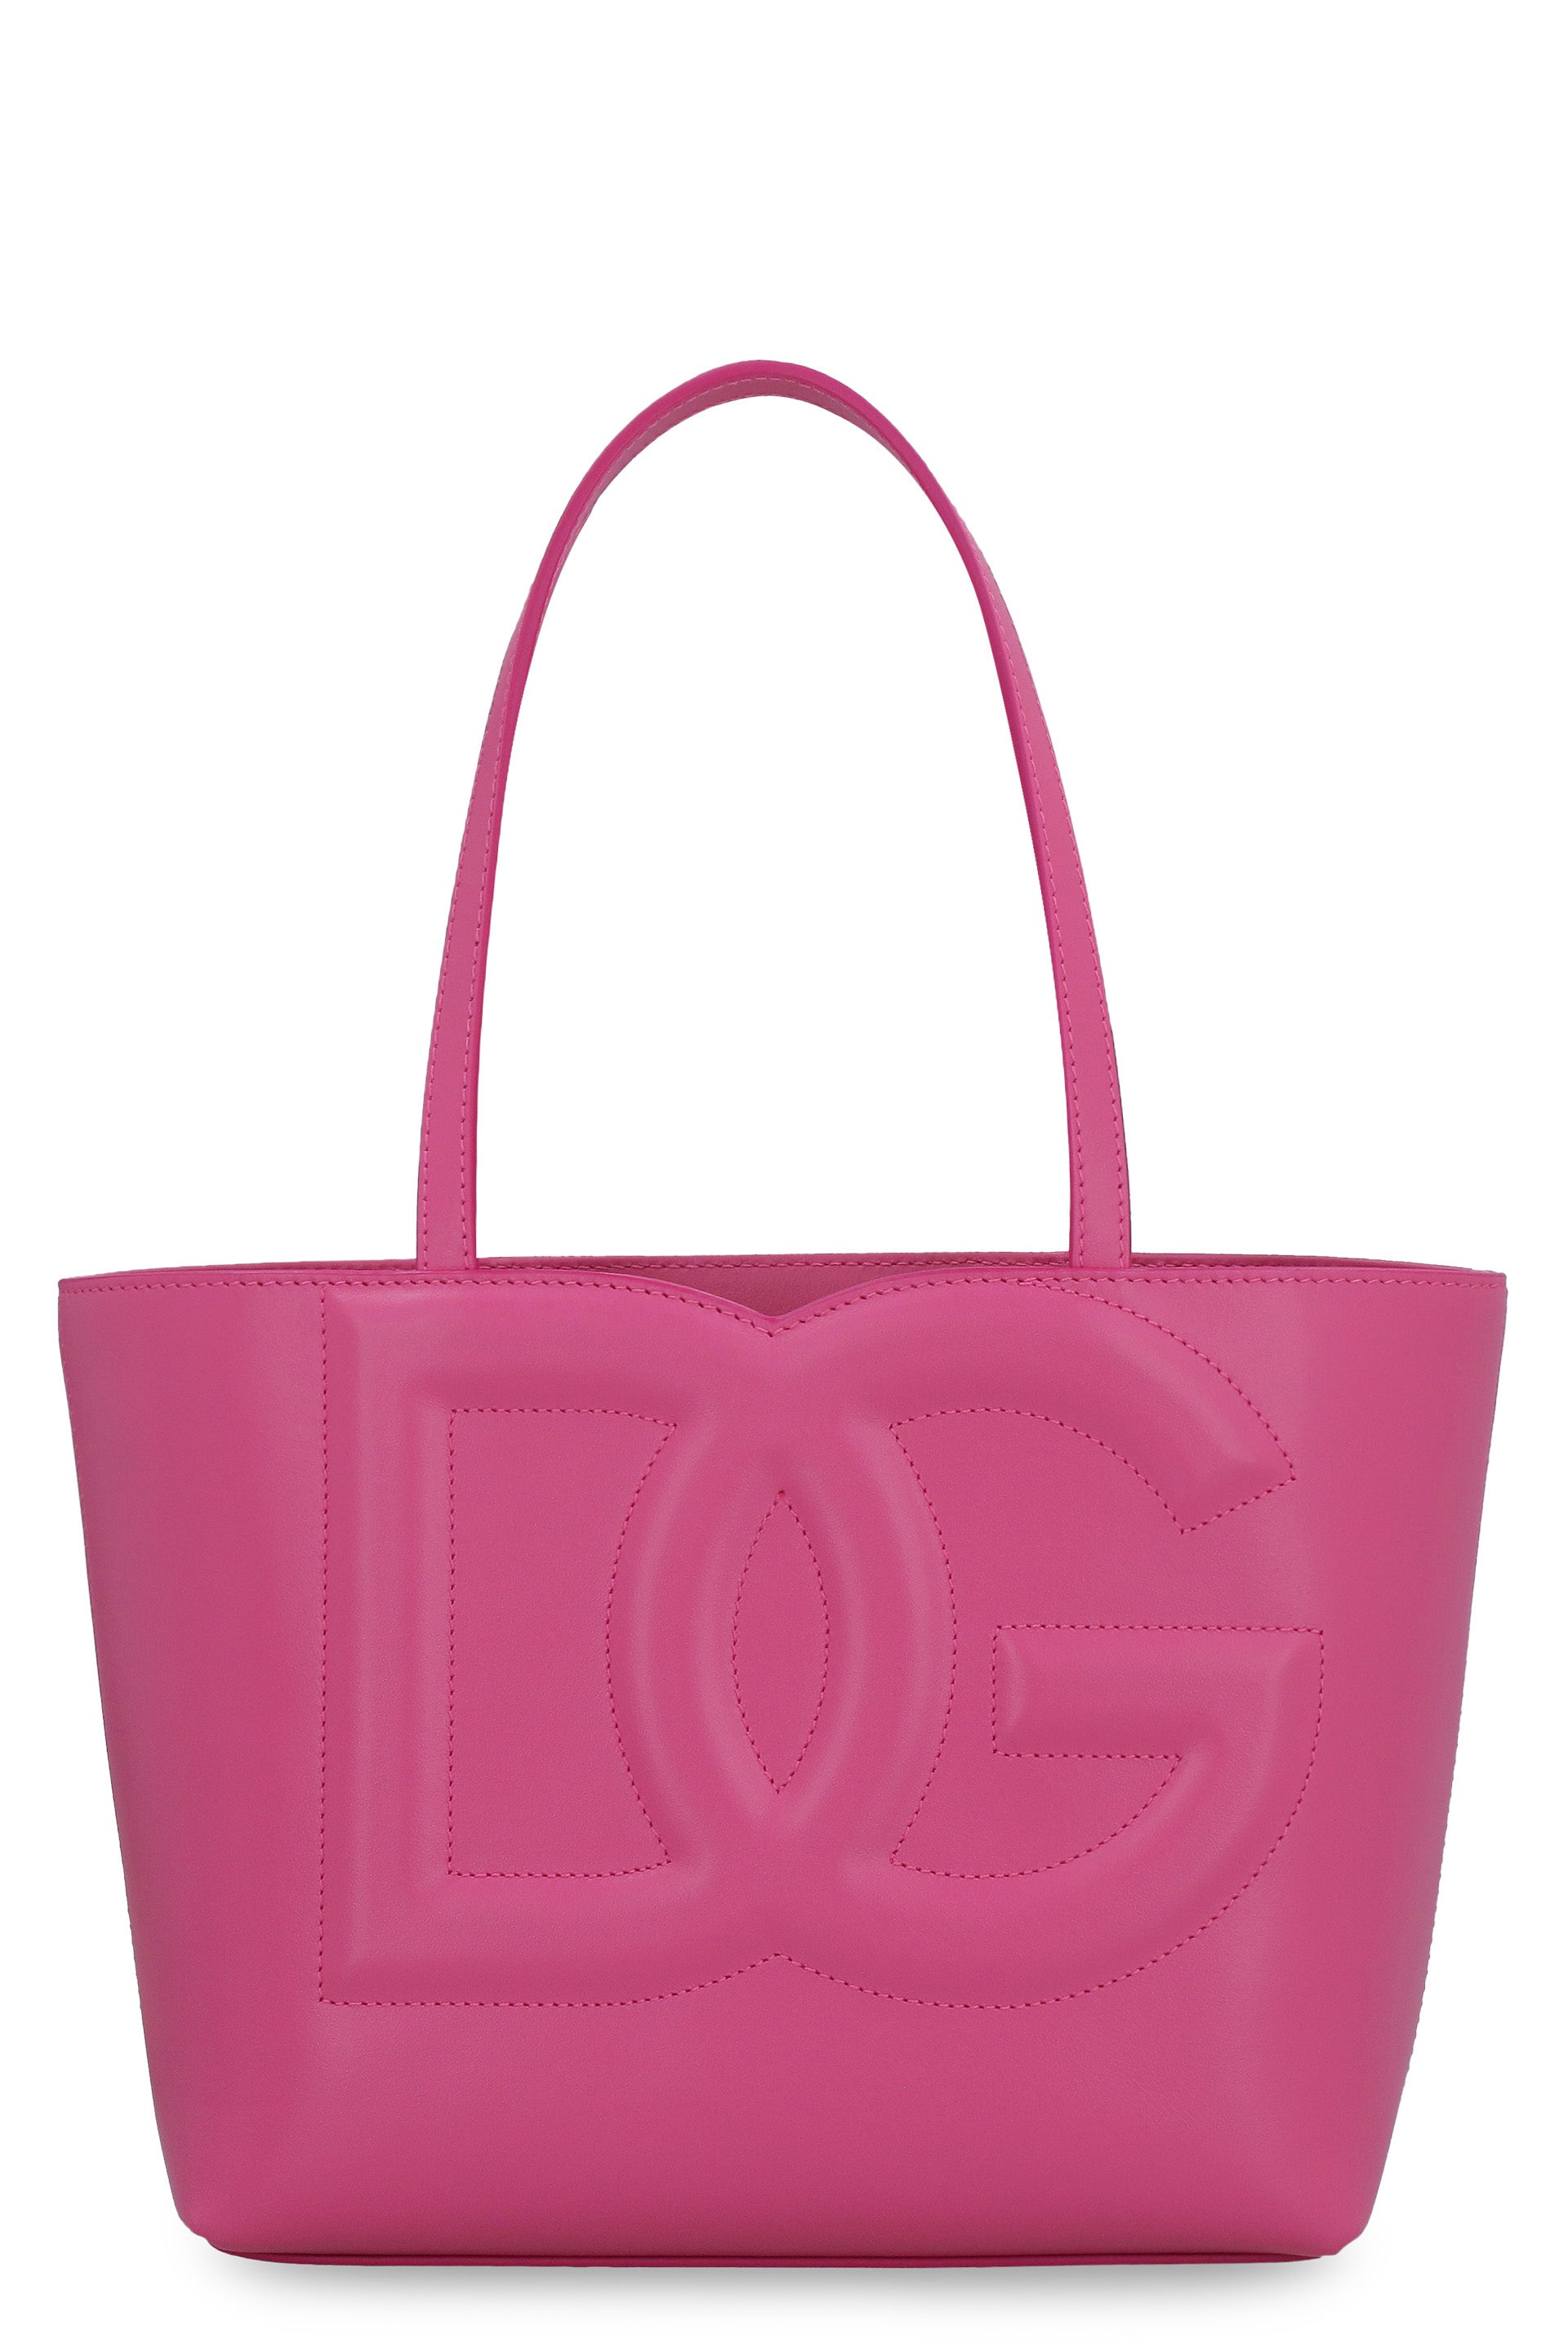 Chanel Clear Rubber Jelly Tote Bag